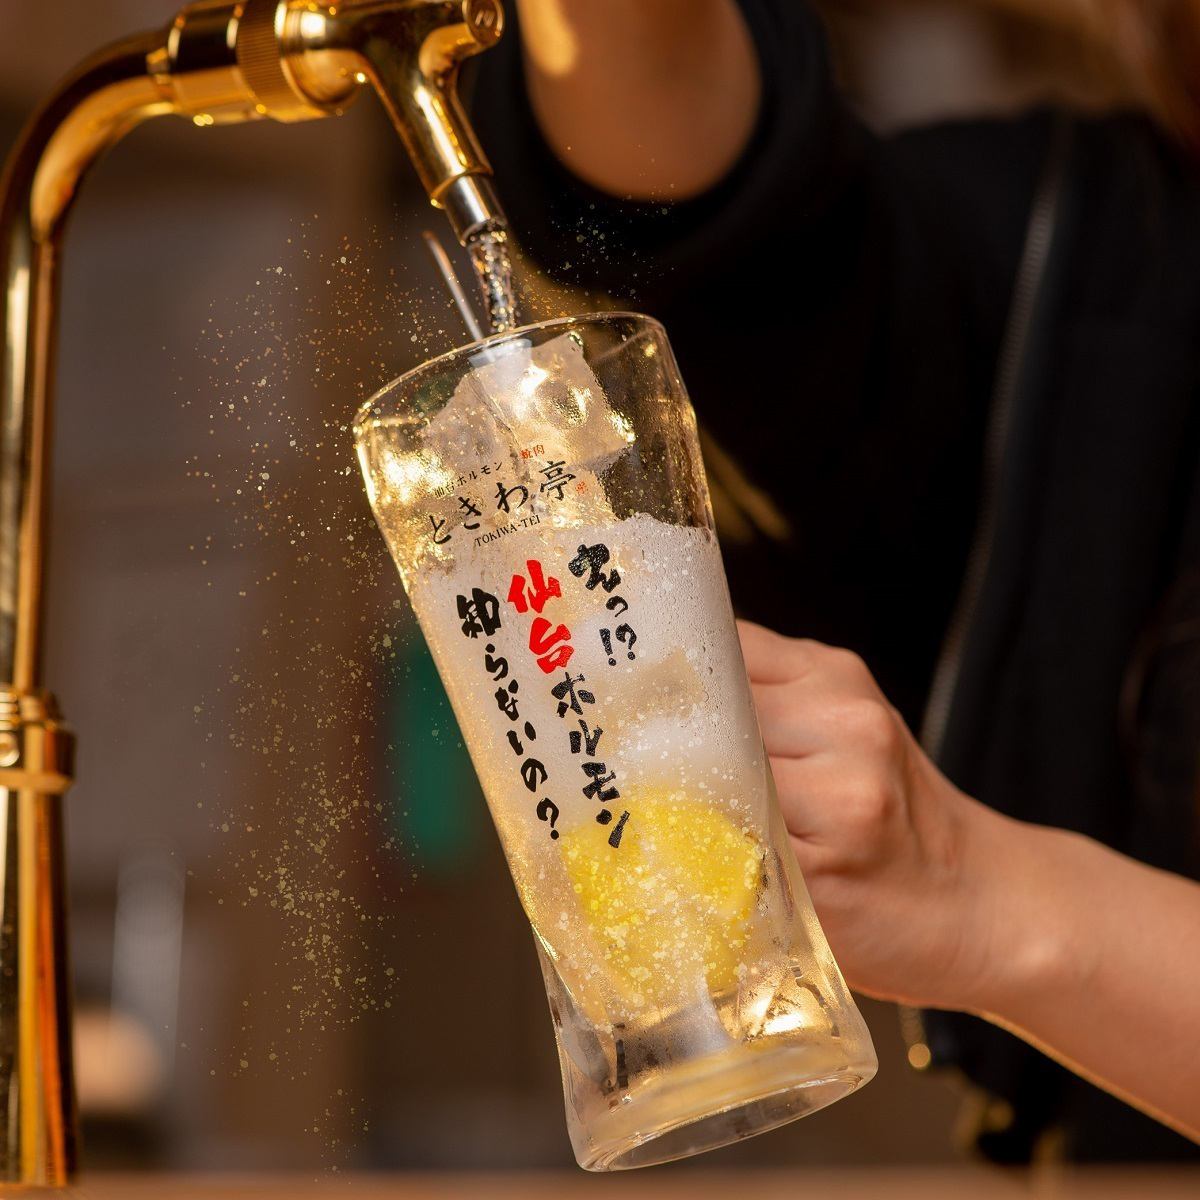 All seats are equipped with lemon sour servers! All-you-can-drink 0 seconds lemon sour for 550 yen